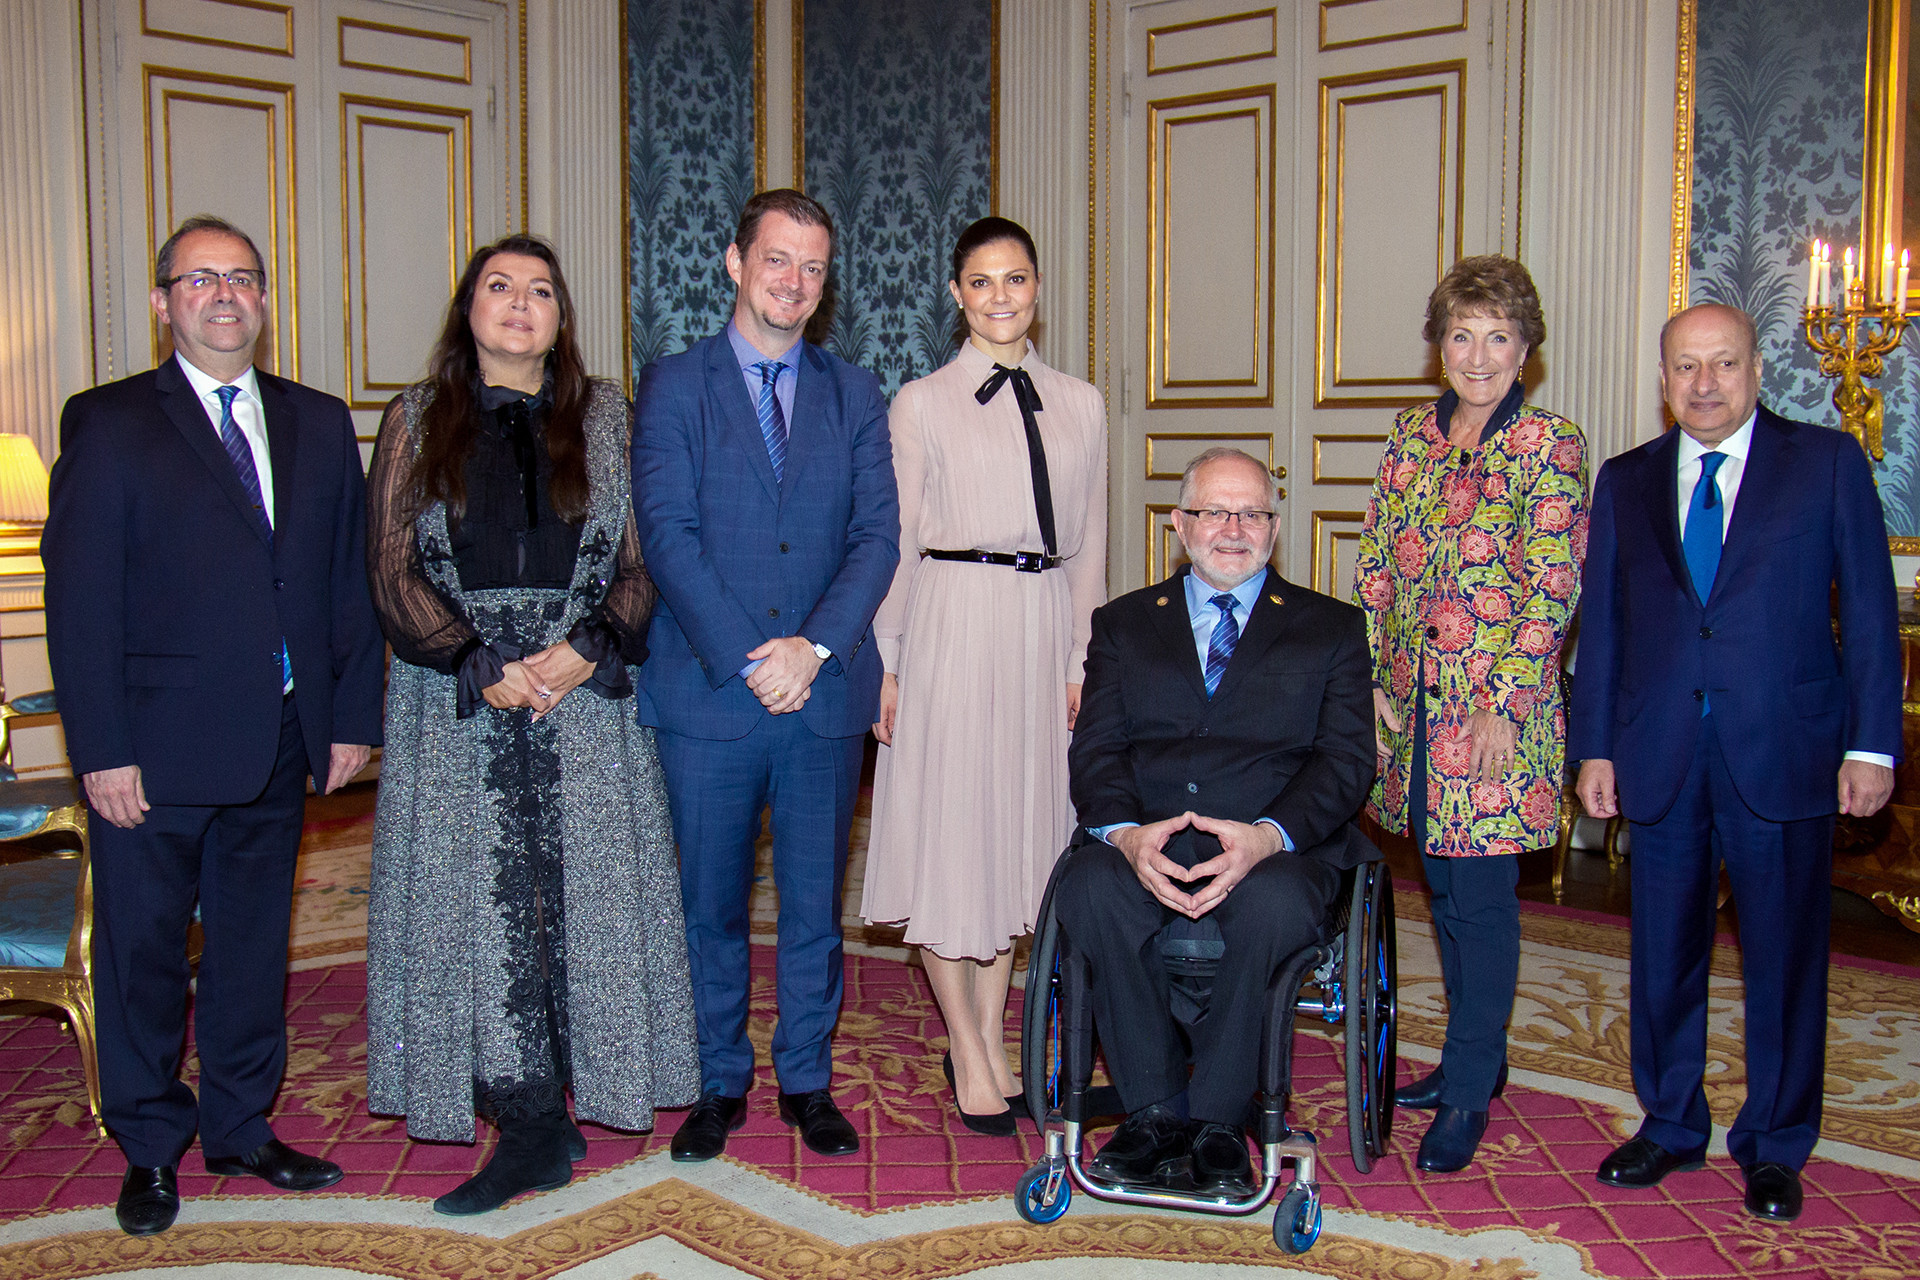 IPC Honorary Board meeting welcomed by royal host in Sweden